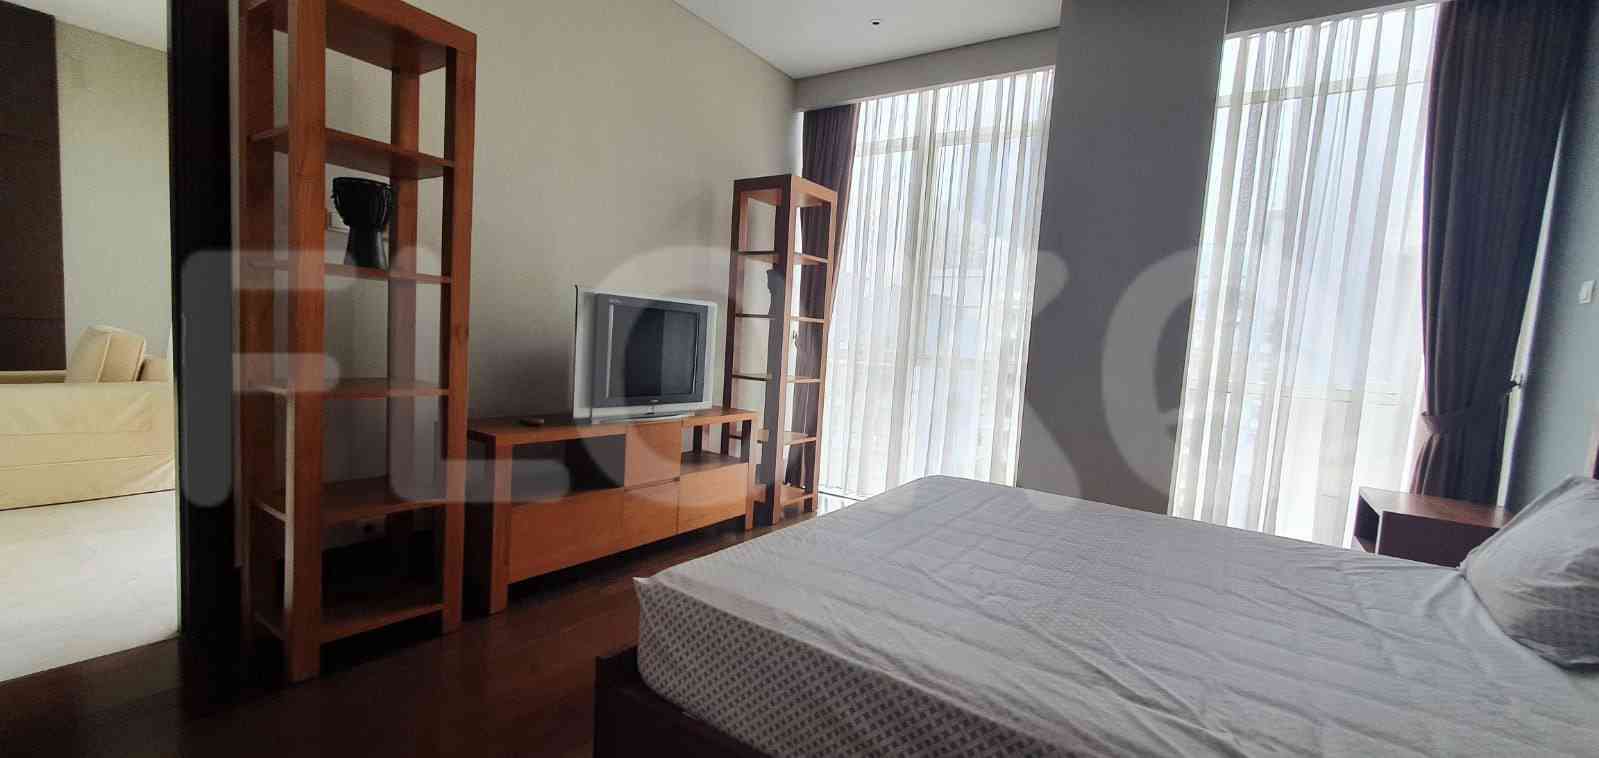 3 Bedroom on 7th Floor for Rent in Pearl Garden Apartment - fgace6 2